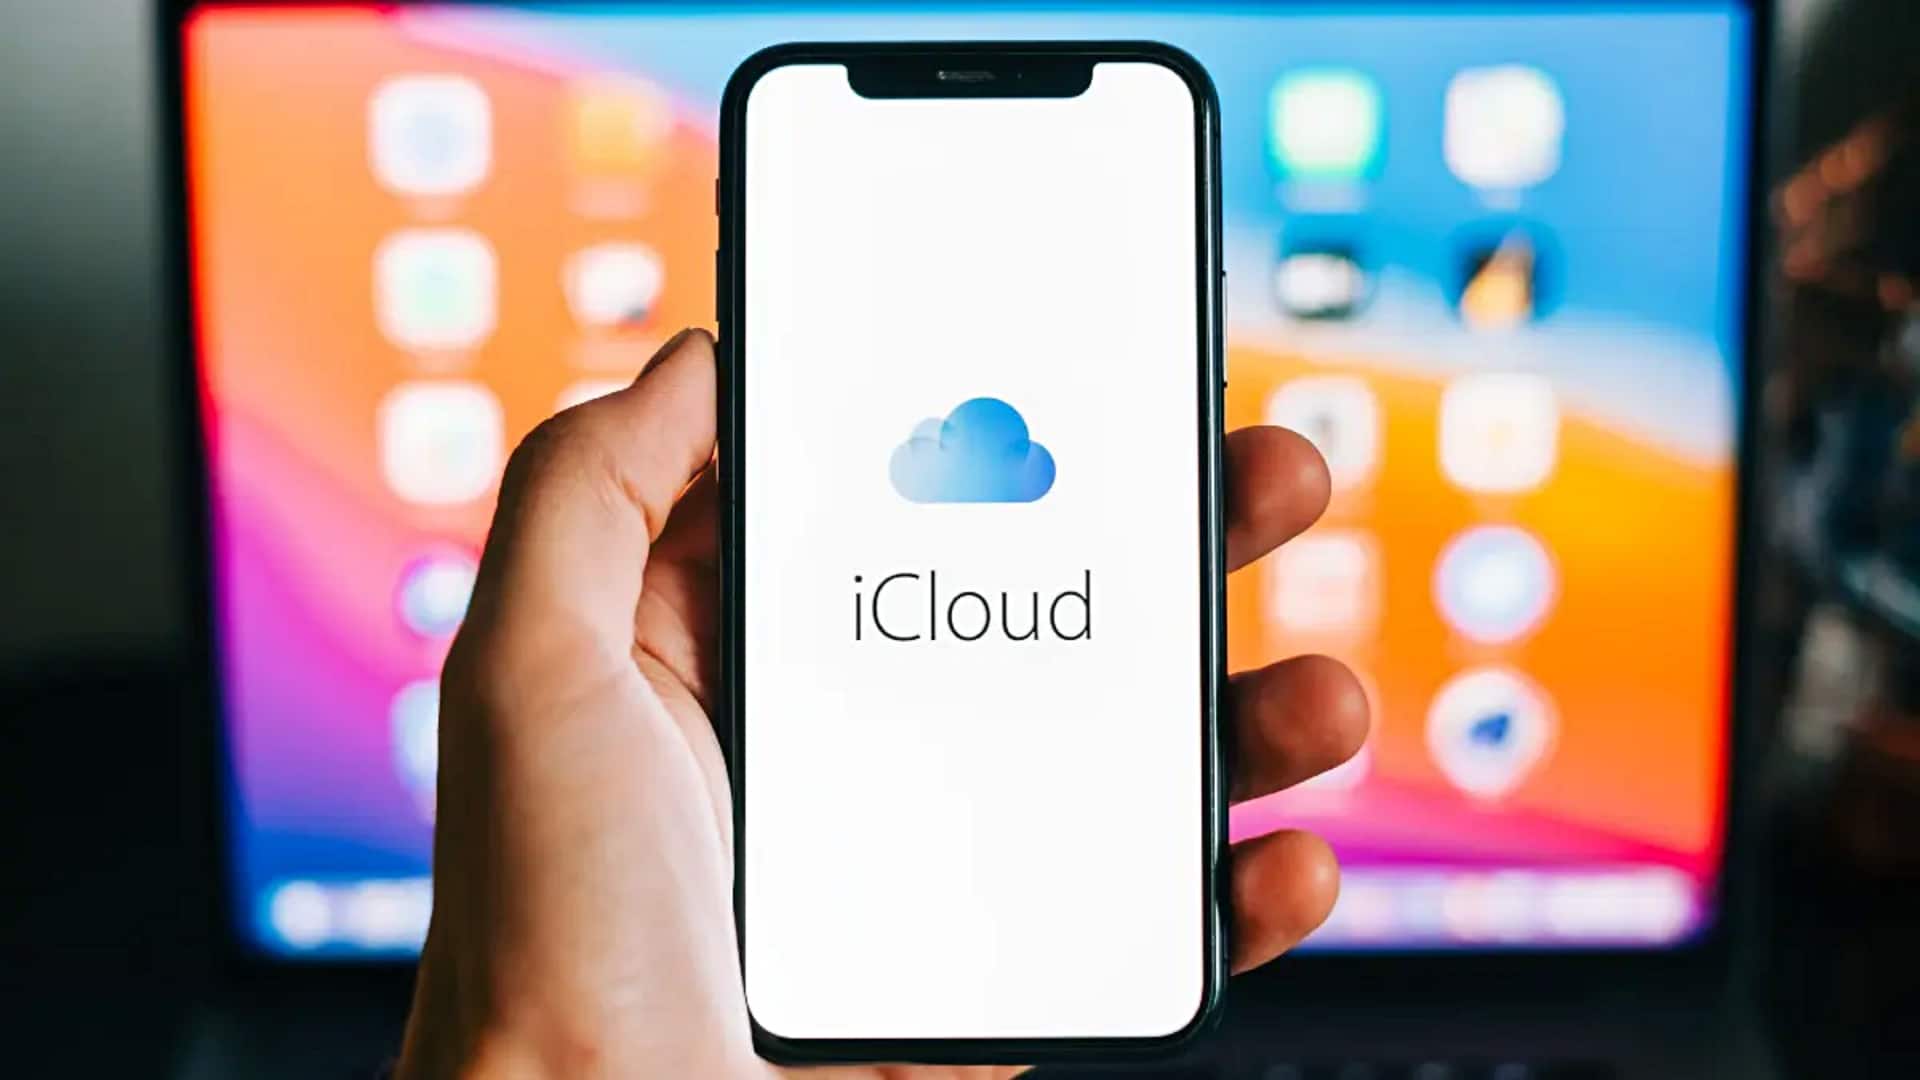 Apple faces class action lawsuit over iCloud pricing, backup restrictions